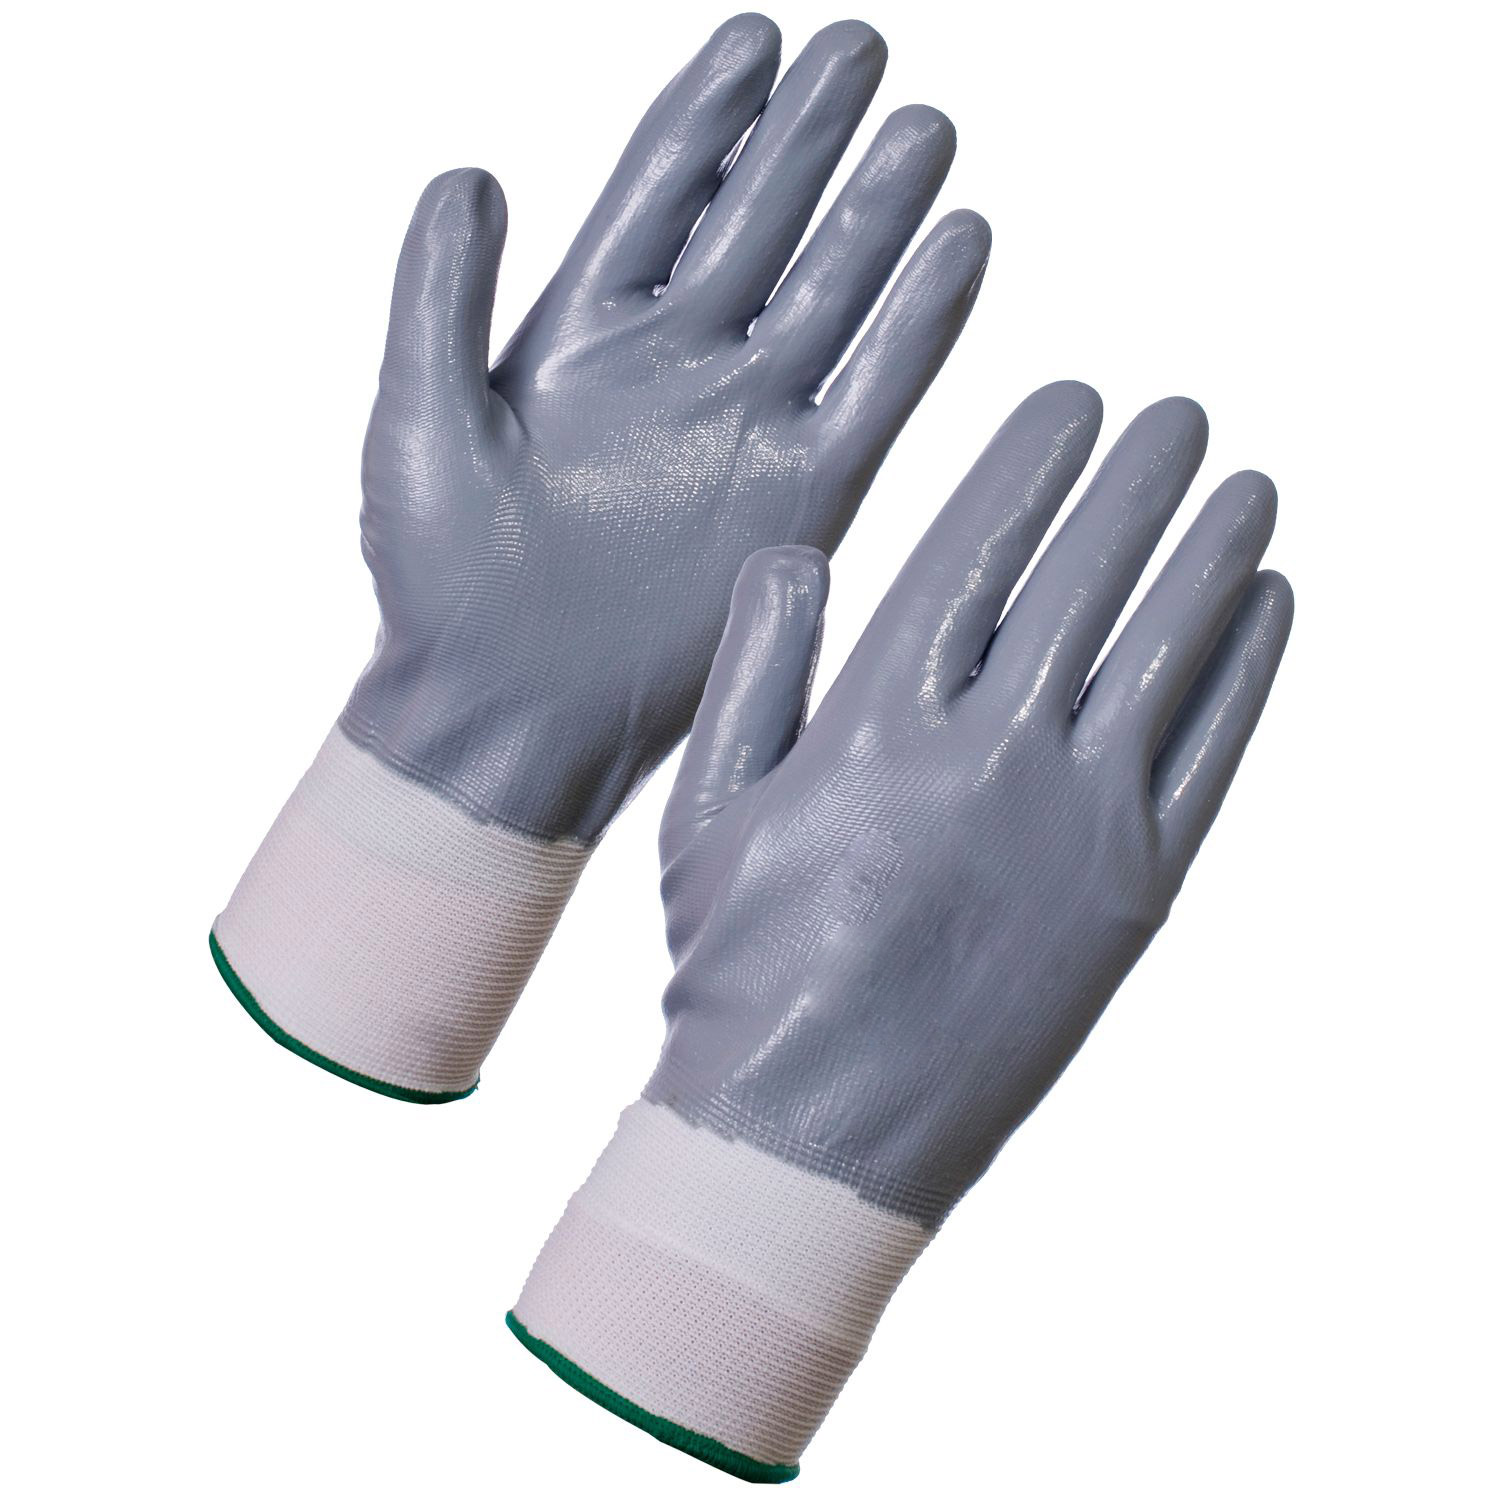 Plus Abrasion Resistance Washable Nitrile Palm Full Dipped Work Gloves